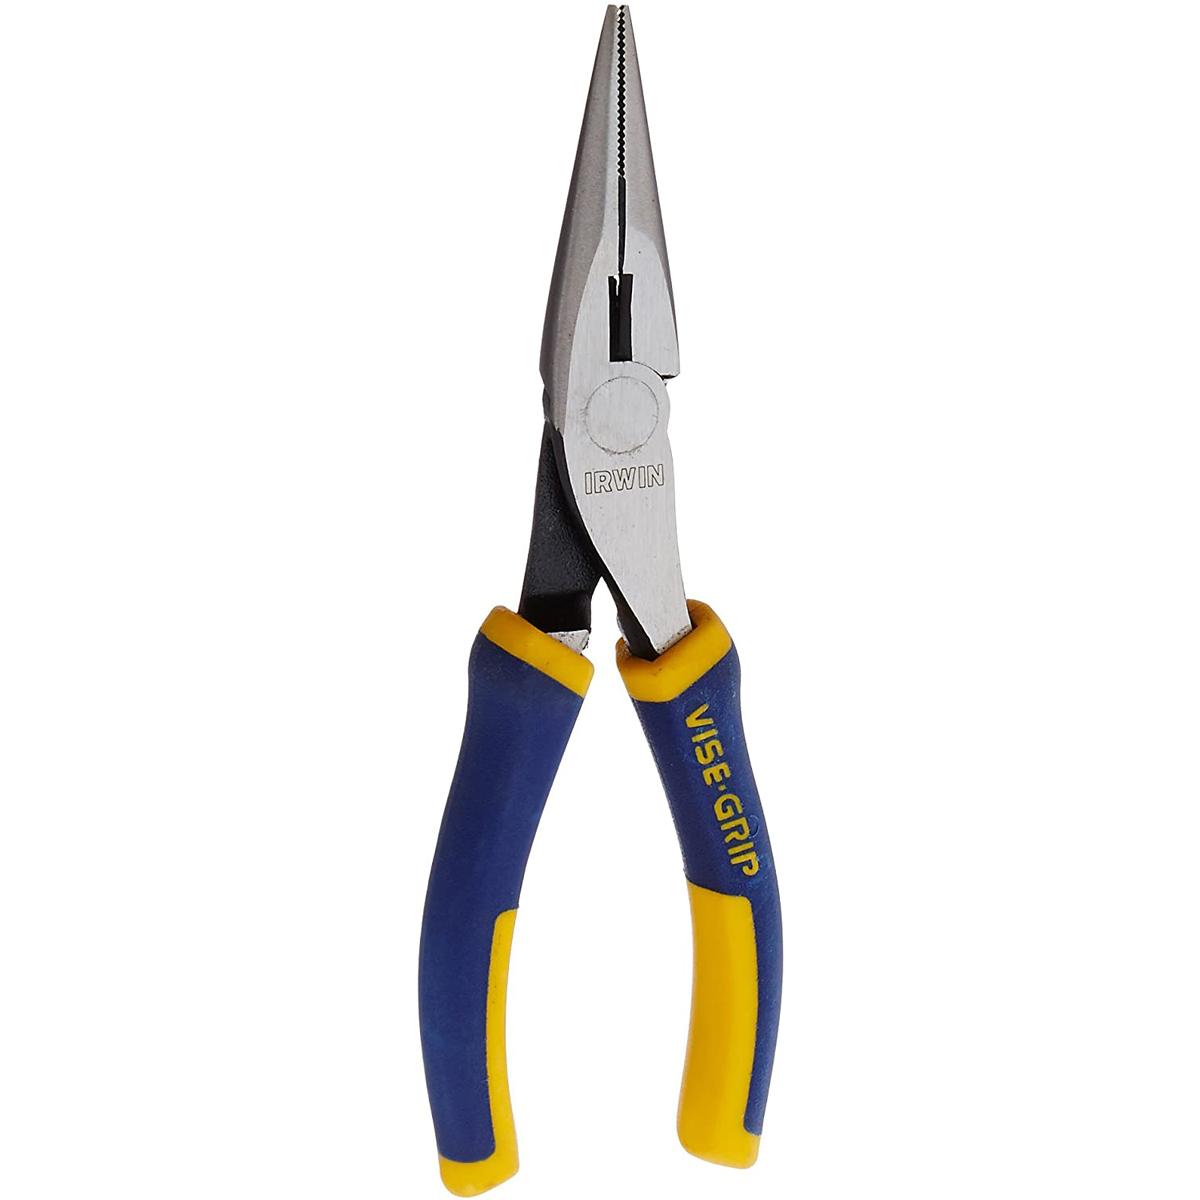 Irwin Vise-Grip 6in Long Nose Pliers for $7.19